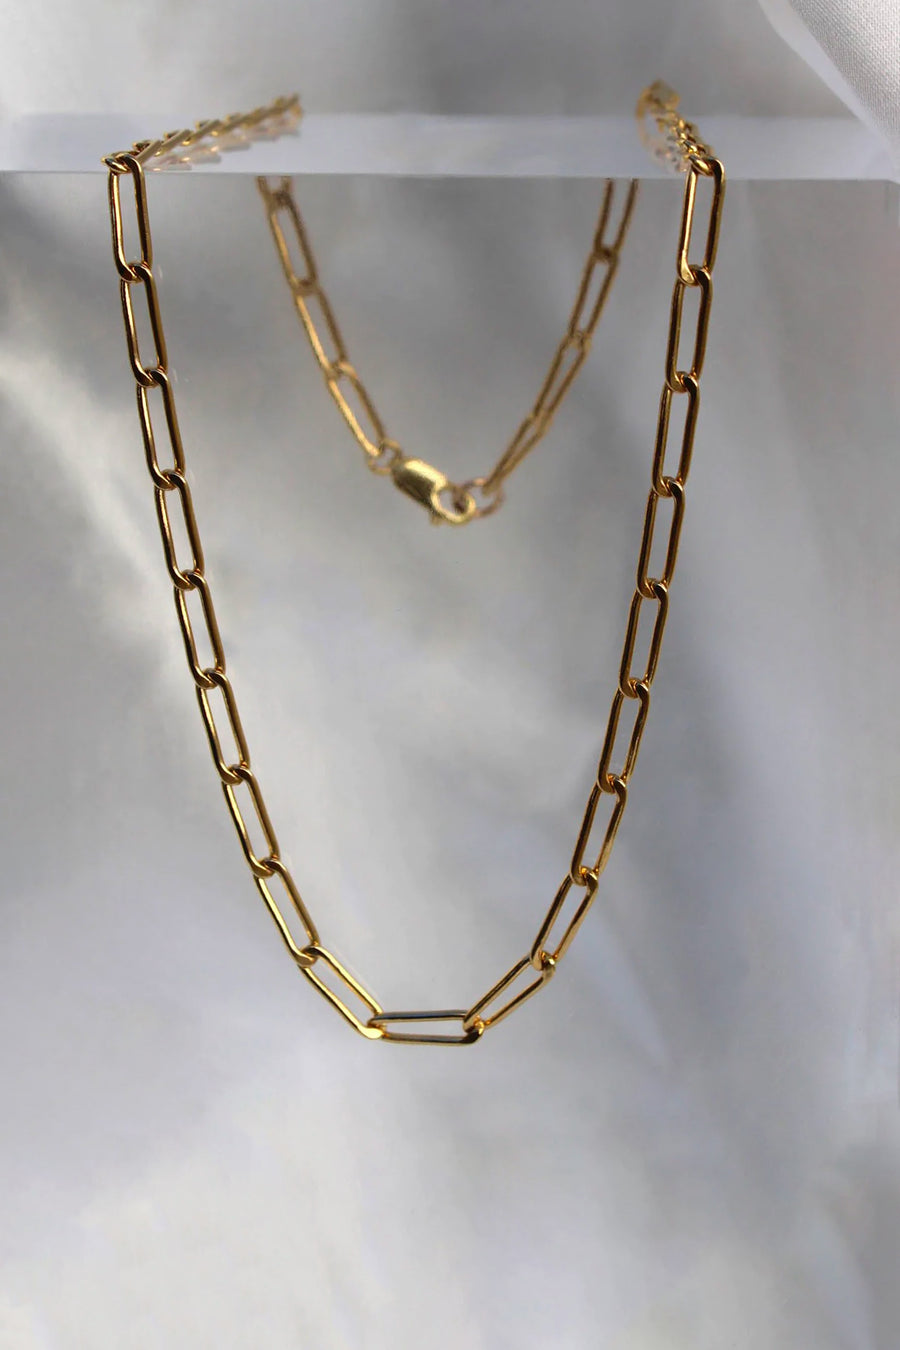 Sadie Jo Jewelry Co. Twisted Paperclip Chain in Gold Fill